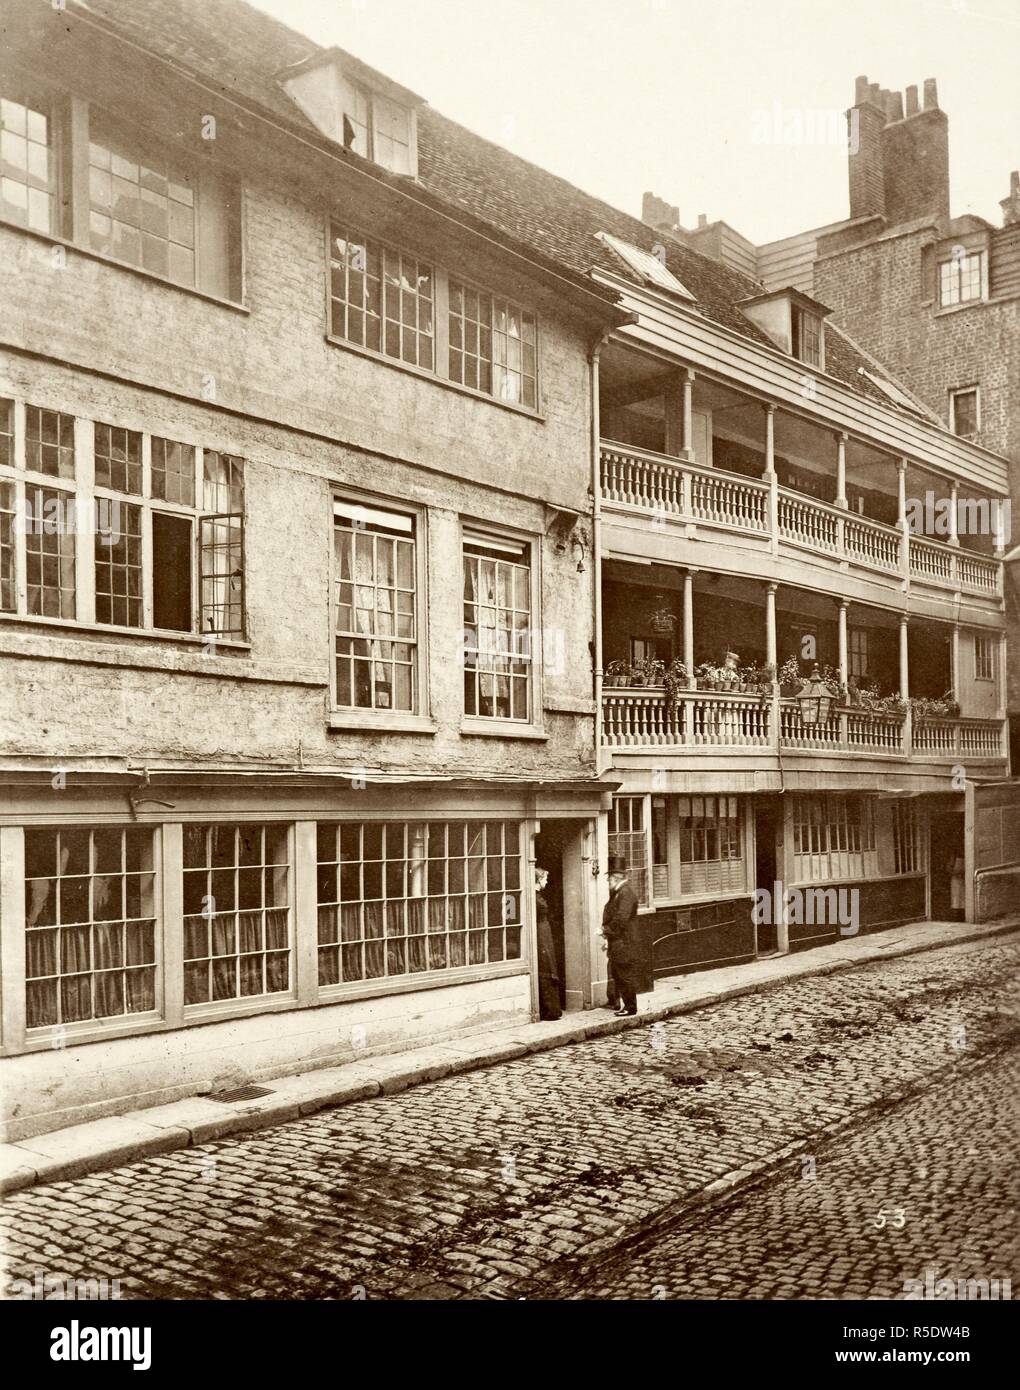 George Inn Yard, Southwark. One hundred and twenty plates with text, and fifteen unpublished plates. Society for photographing Relics of Old London. London, 1875. Source: Tab.700.b.3, plate 53. Stock Photo